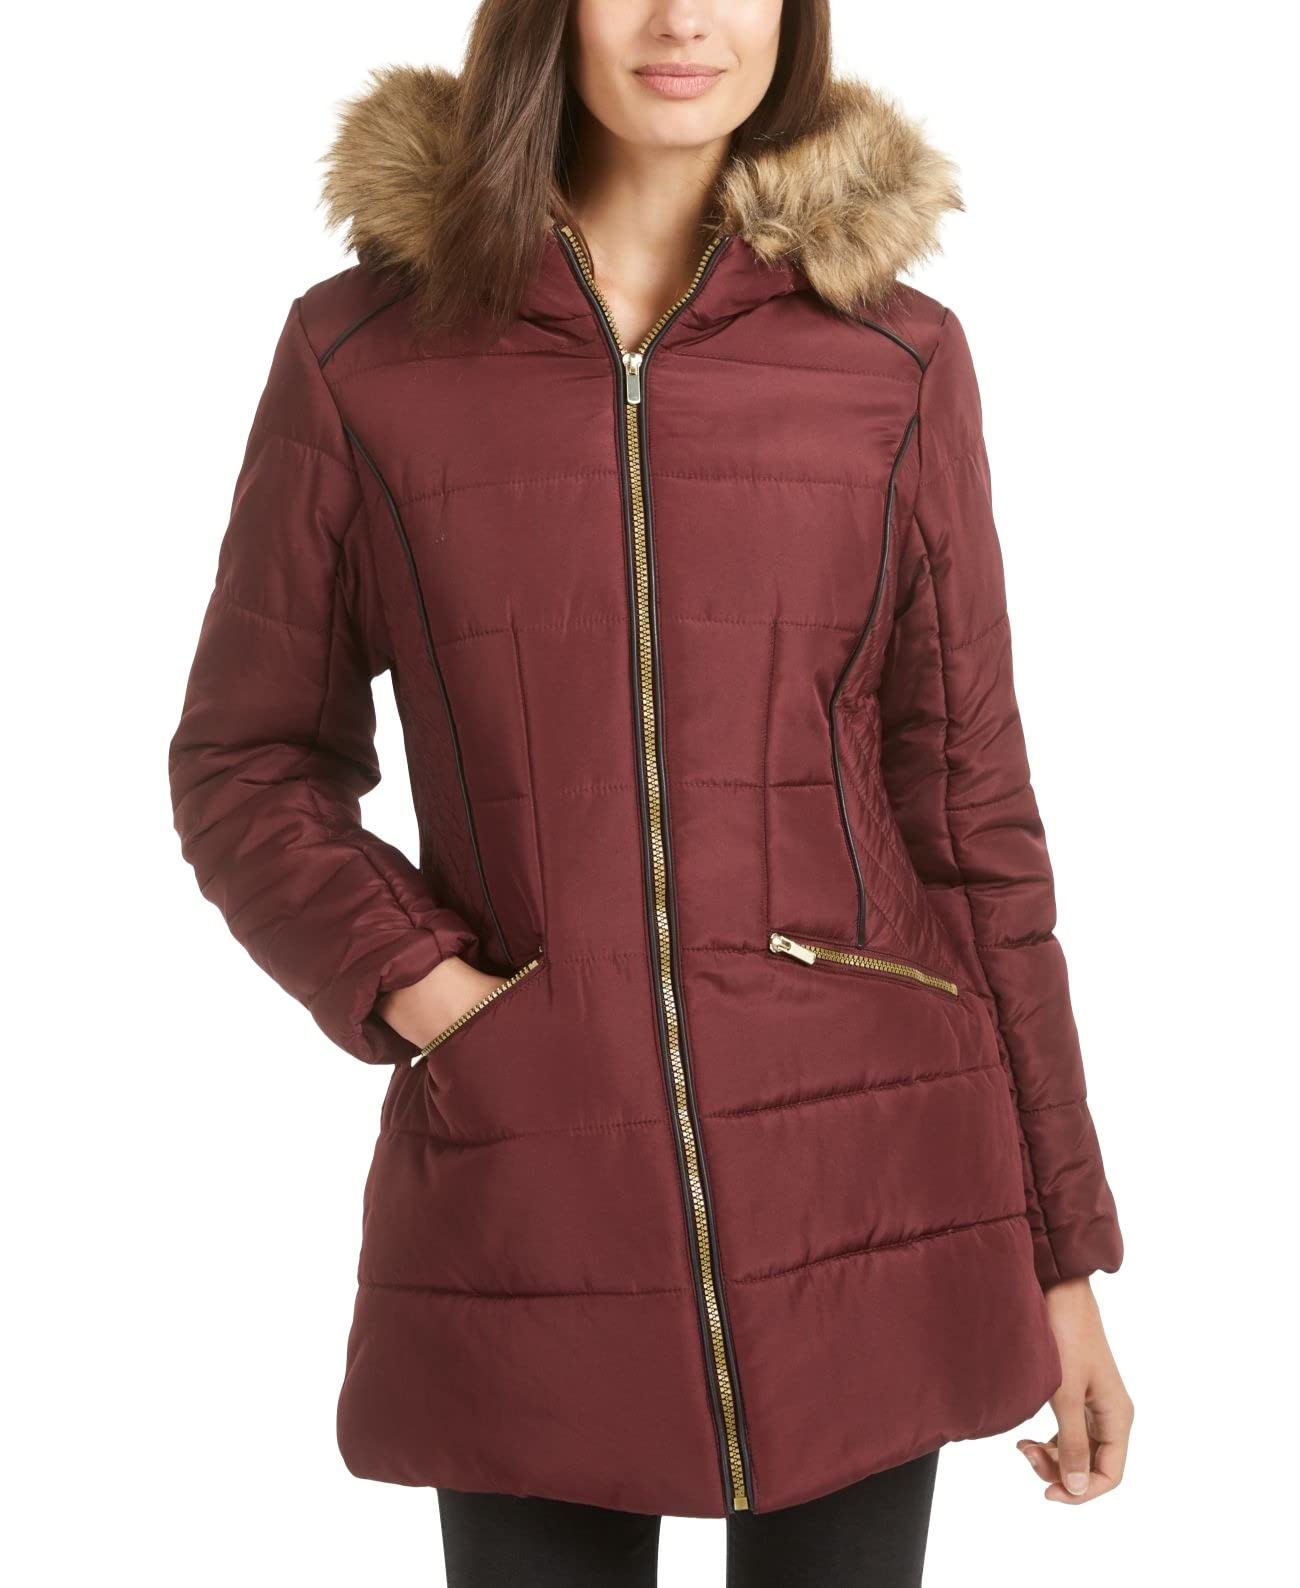 CELEBRITY PINK Womens Burgundy Faux Fur Pocketed Zippered Puffer Winter Jacket Coat S - image 2 of 3